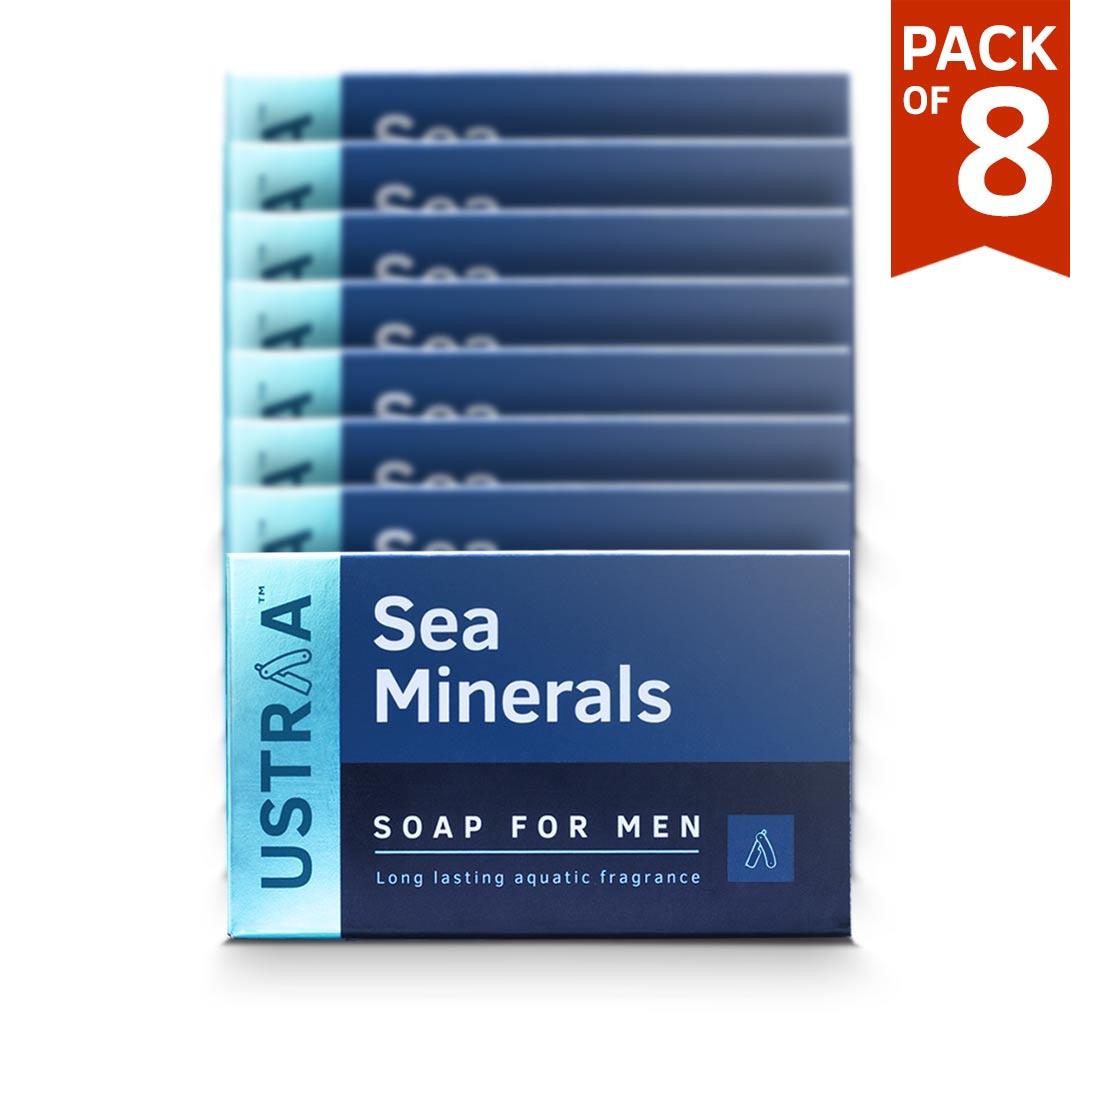 Best Deodorising Soap For Men - With Sea Minerals - Cleansing & Moisturization with Aquatic Fragrance